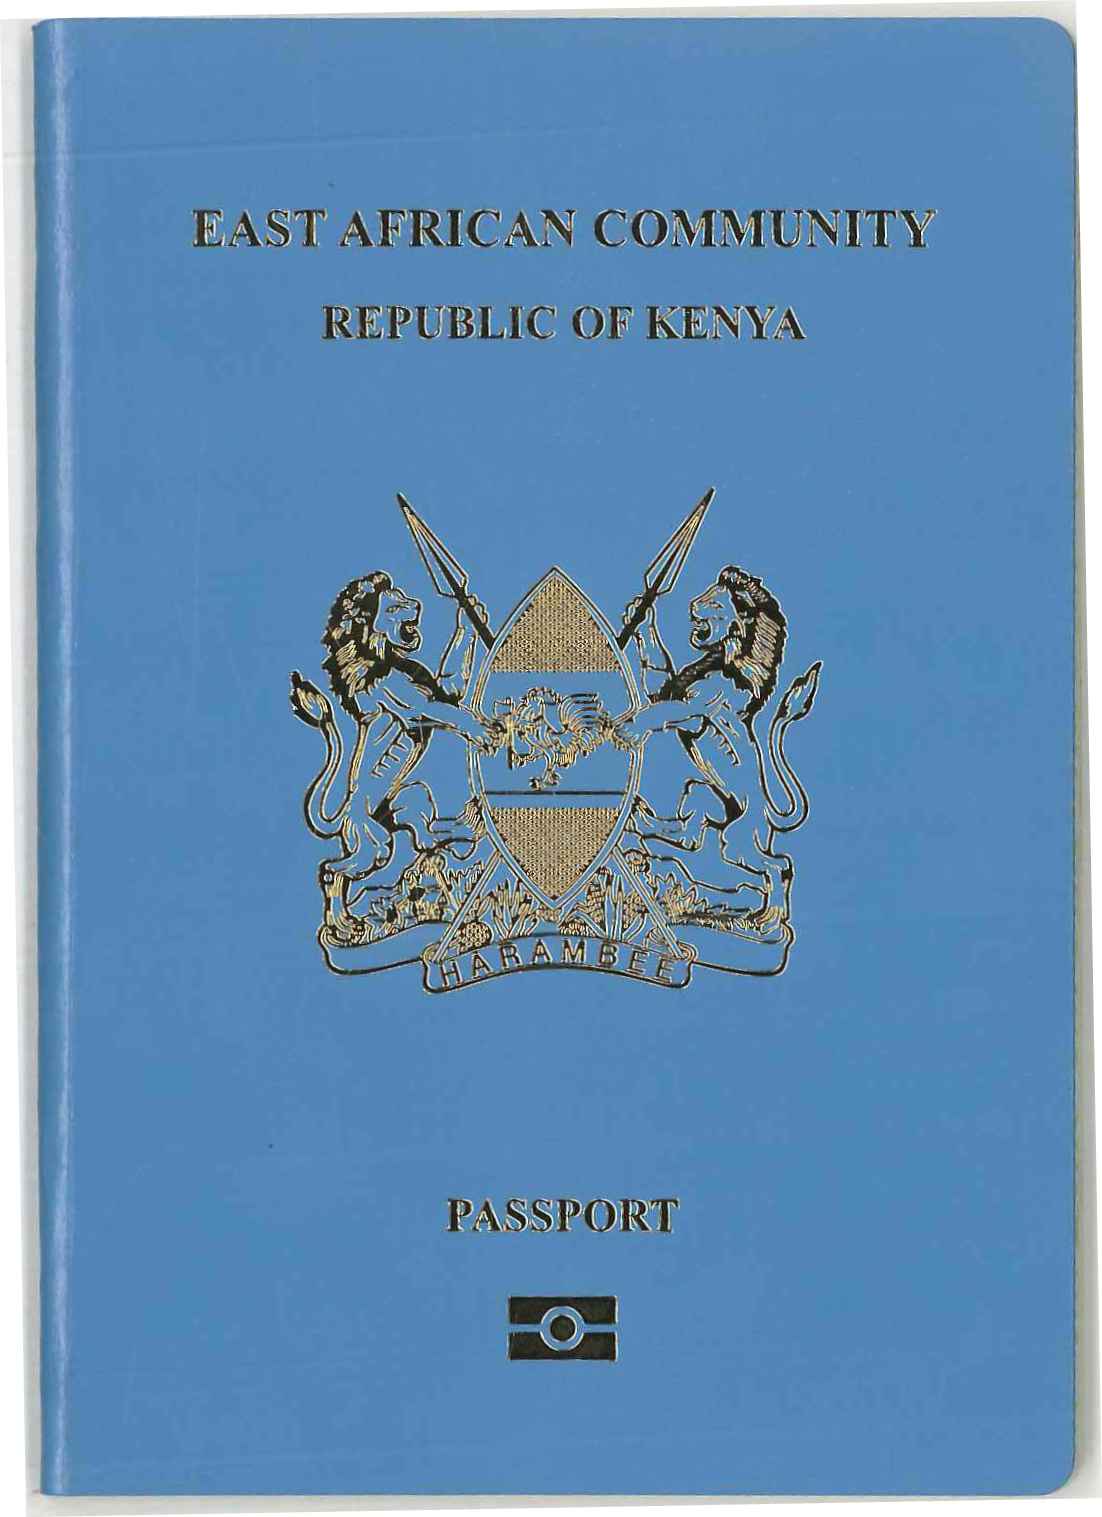 New Kenyan consulate in Los Angeles to offer epassport services